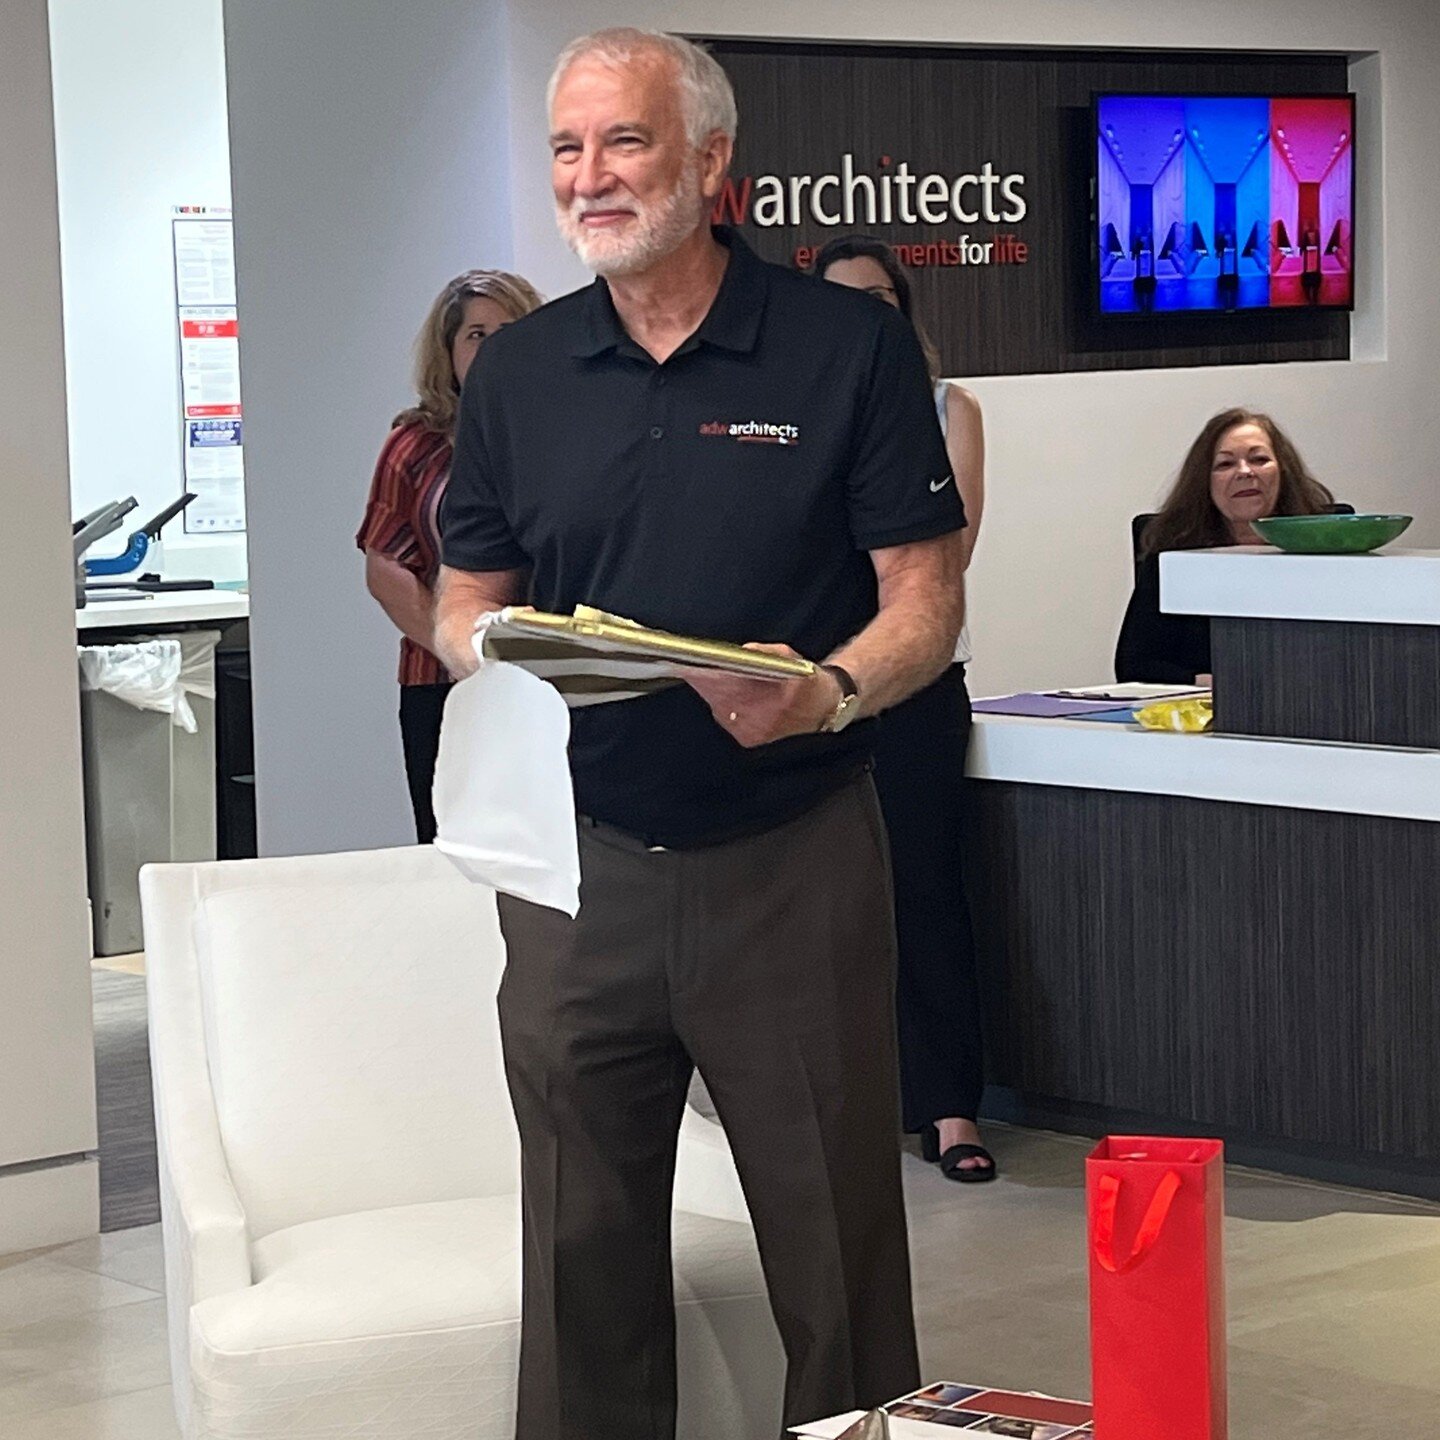 This summer, we celebrated John Watson&rsquo;s retirement from ADW! He has been a fearless leader of the firm since its inception in 1977. We have all benefited from his guidance in collaborative design, client service, and leadership. His mentorship